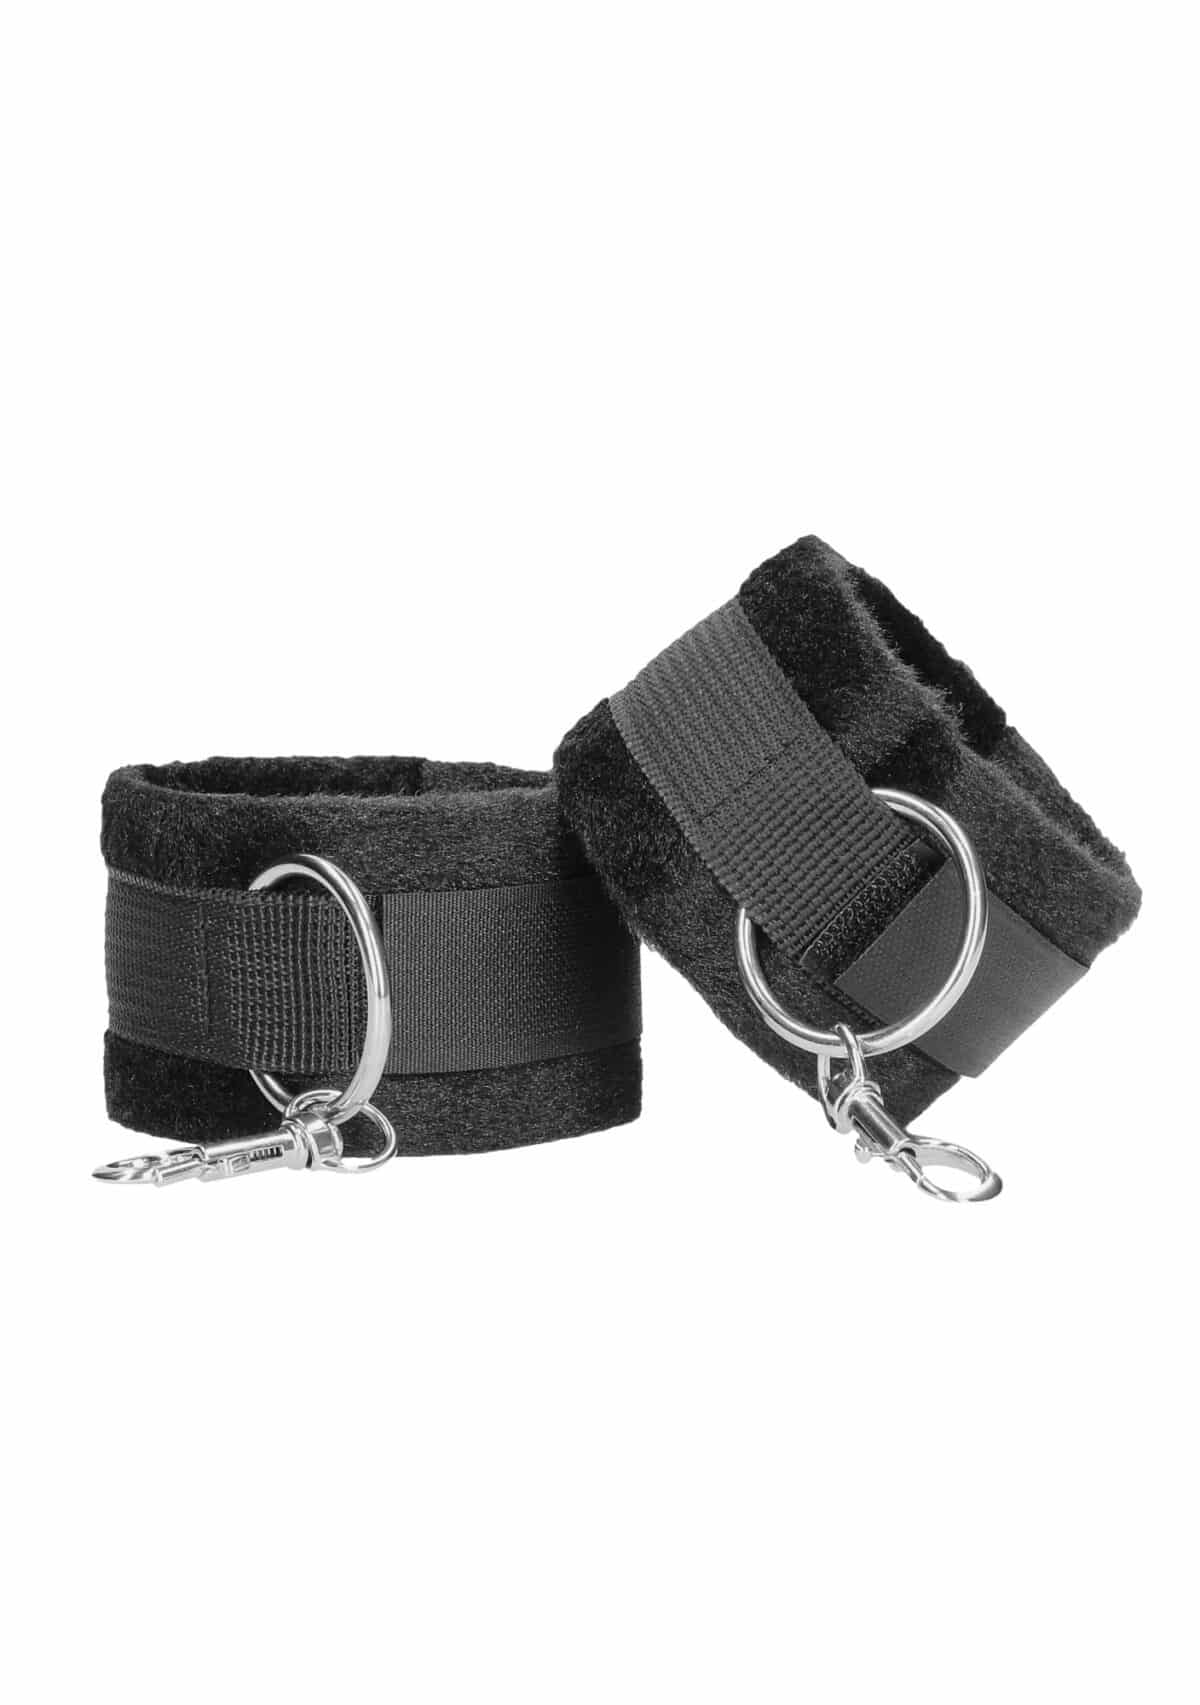 Velcro Hand or Ankle Cuffs